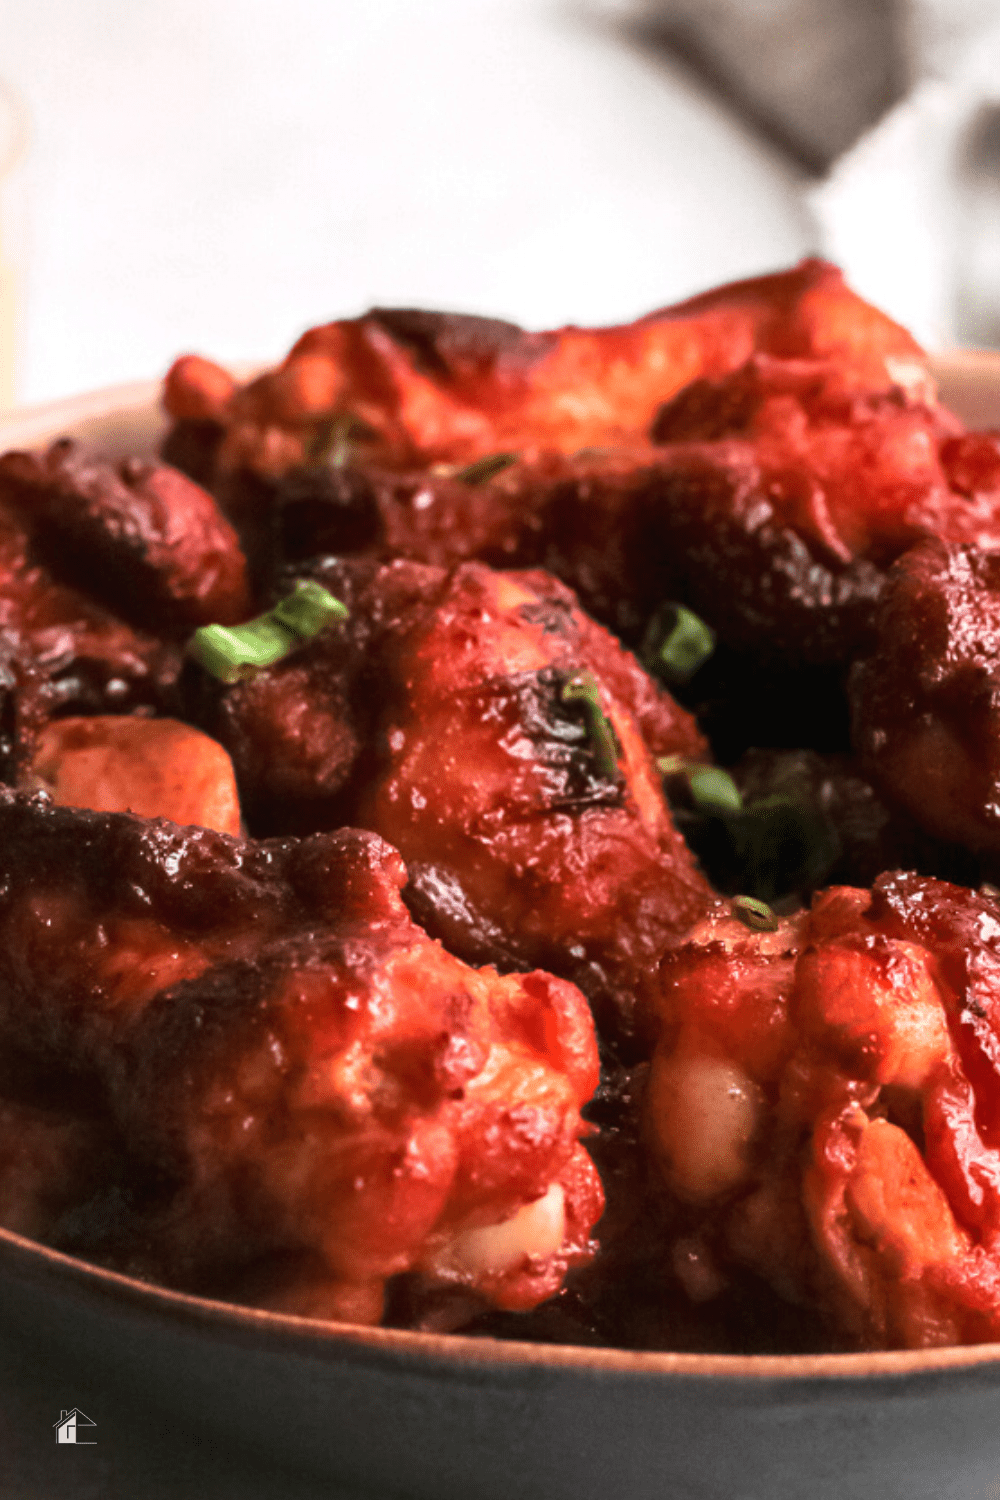 Who doesn't love chicken wings? These Bourbon Honey Air Fryer Chicken Wings are loaded with great flavor that will make your taste buds jump for joy! via @mystayathome